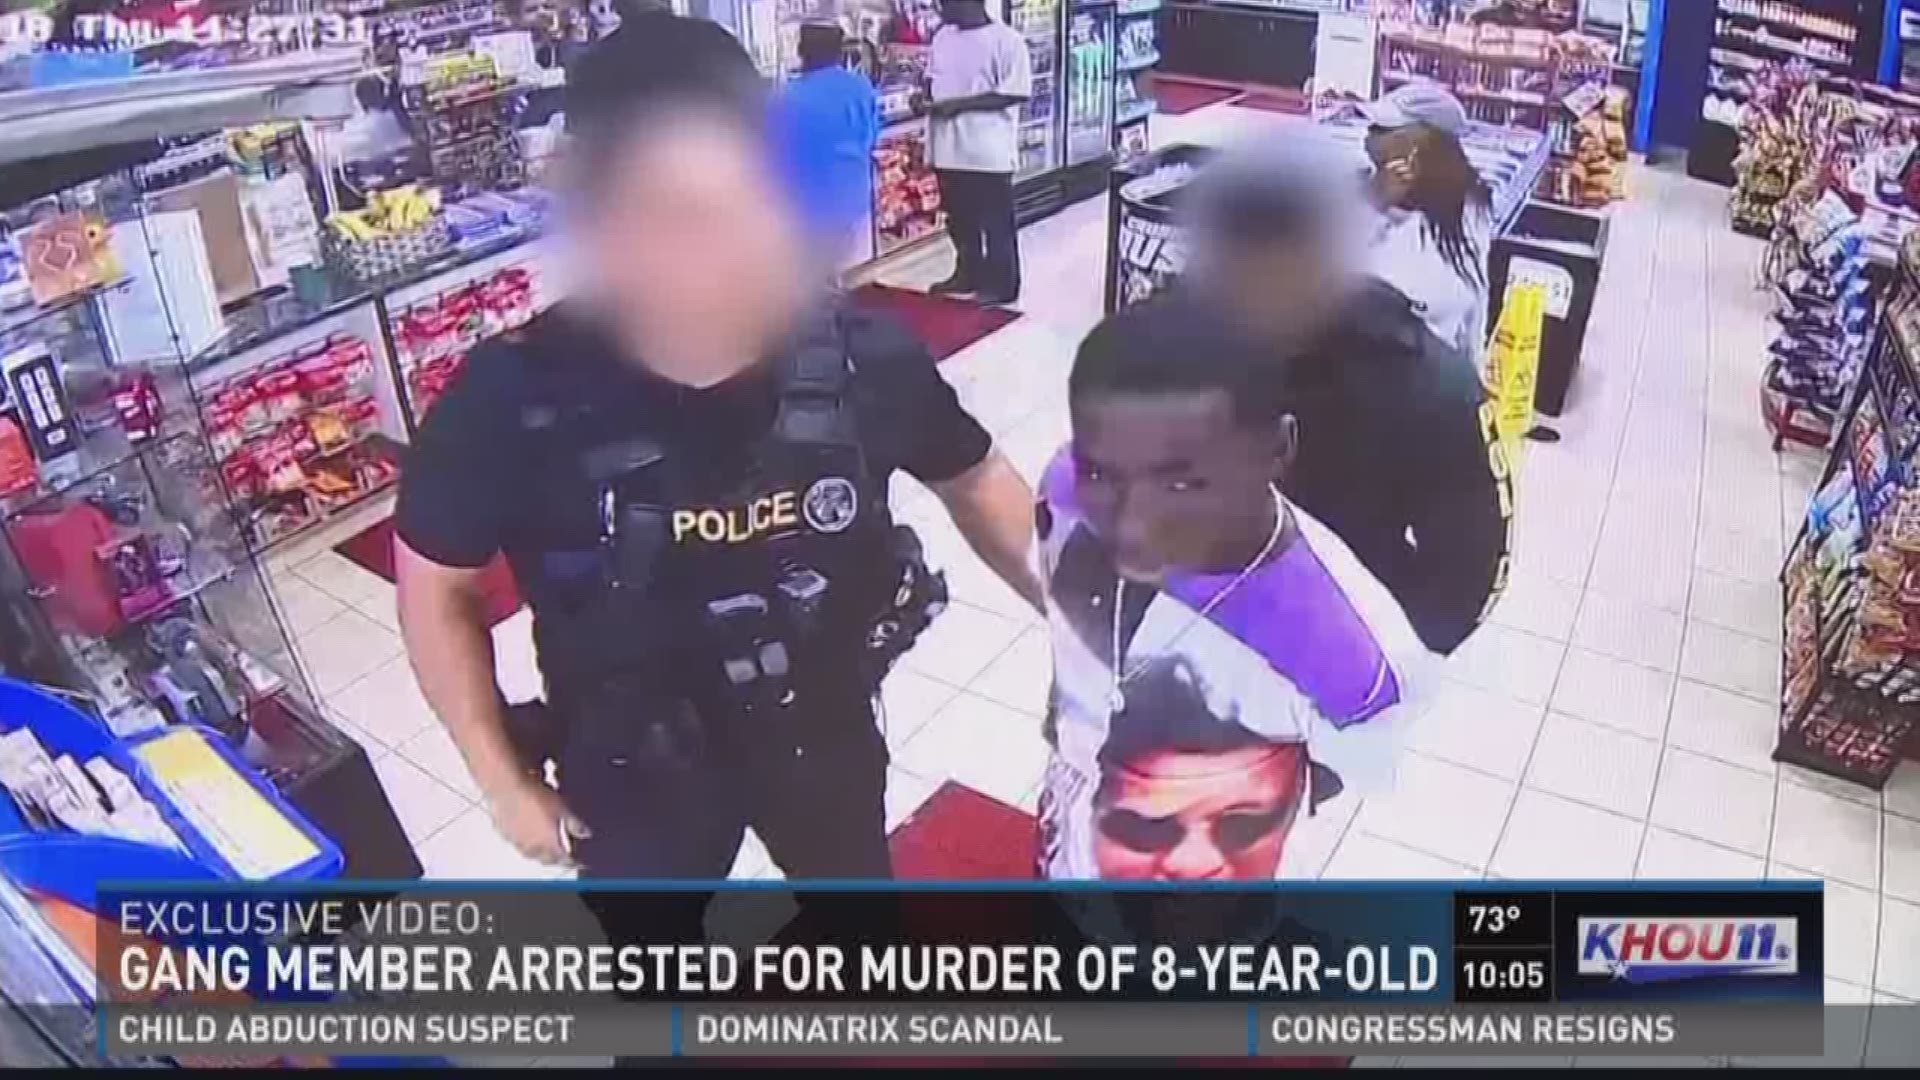 Surveillance footage from a convenience store shows the moments police arrested one of the suspects in a deadly shooting that killed a little boy.